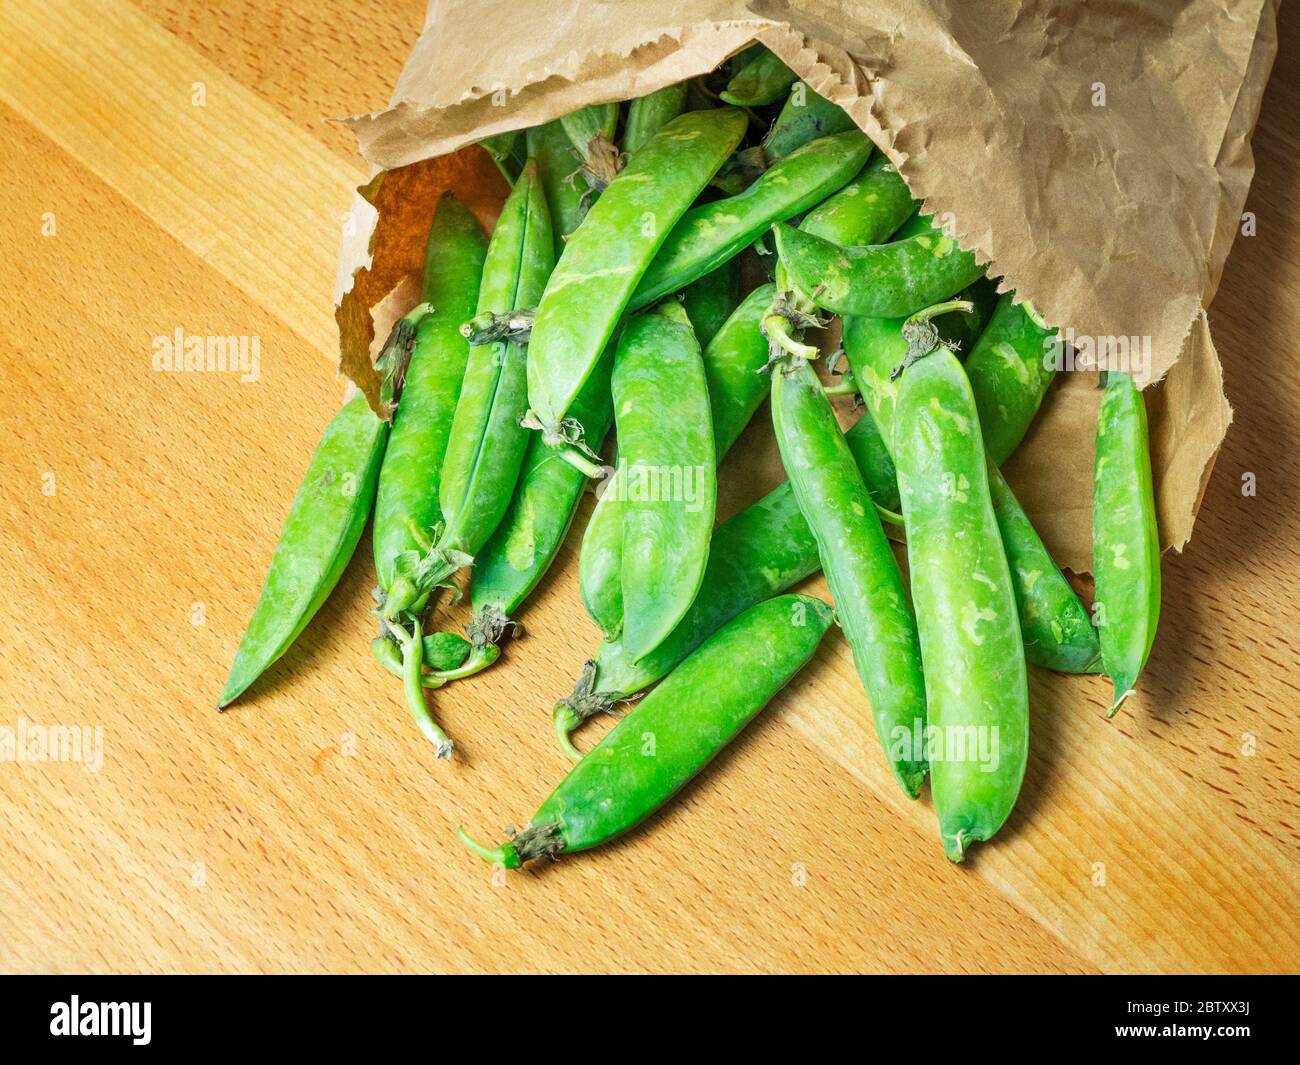 A paper bag of fresh garden peas in pods spilling onto a wooden kitchen table Stock Photo